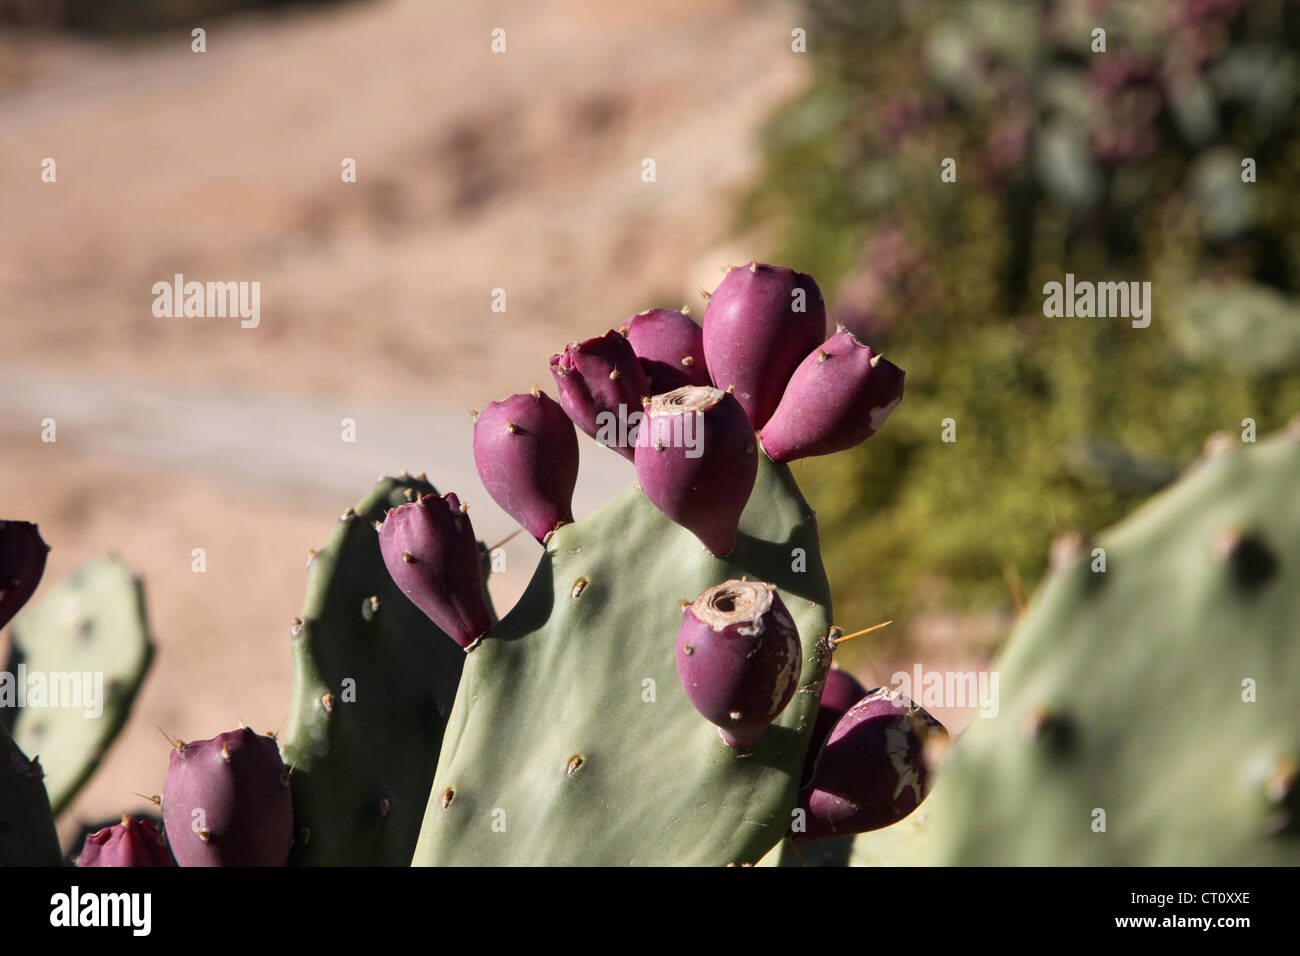 Opuntia with ripe fruits Stock Photo